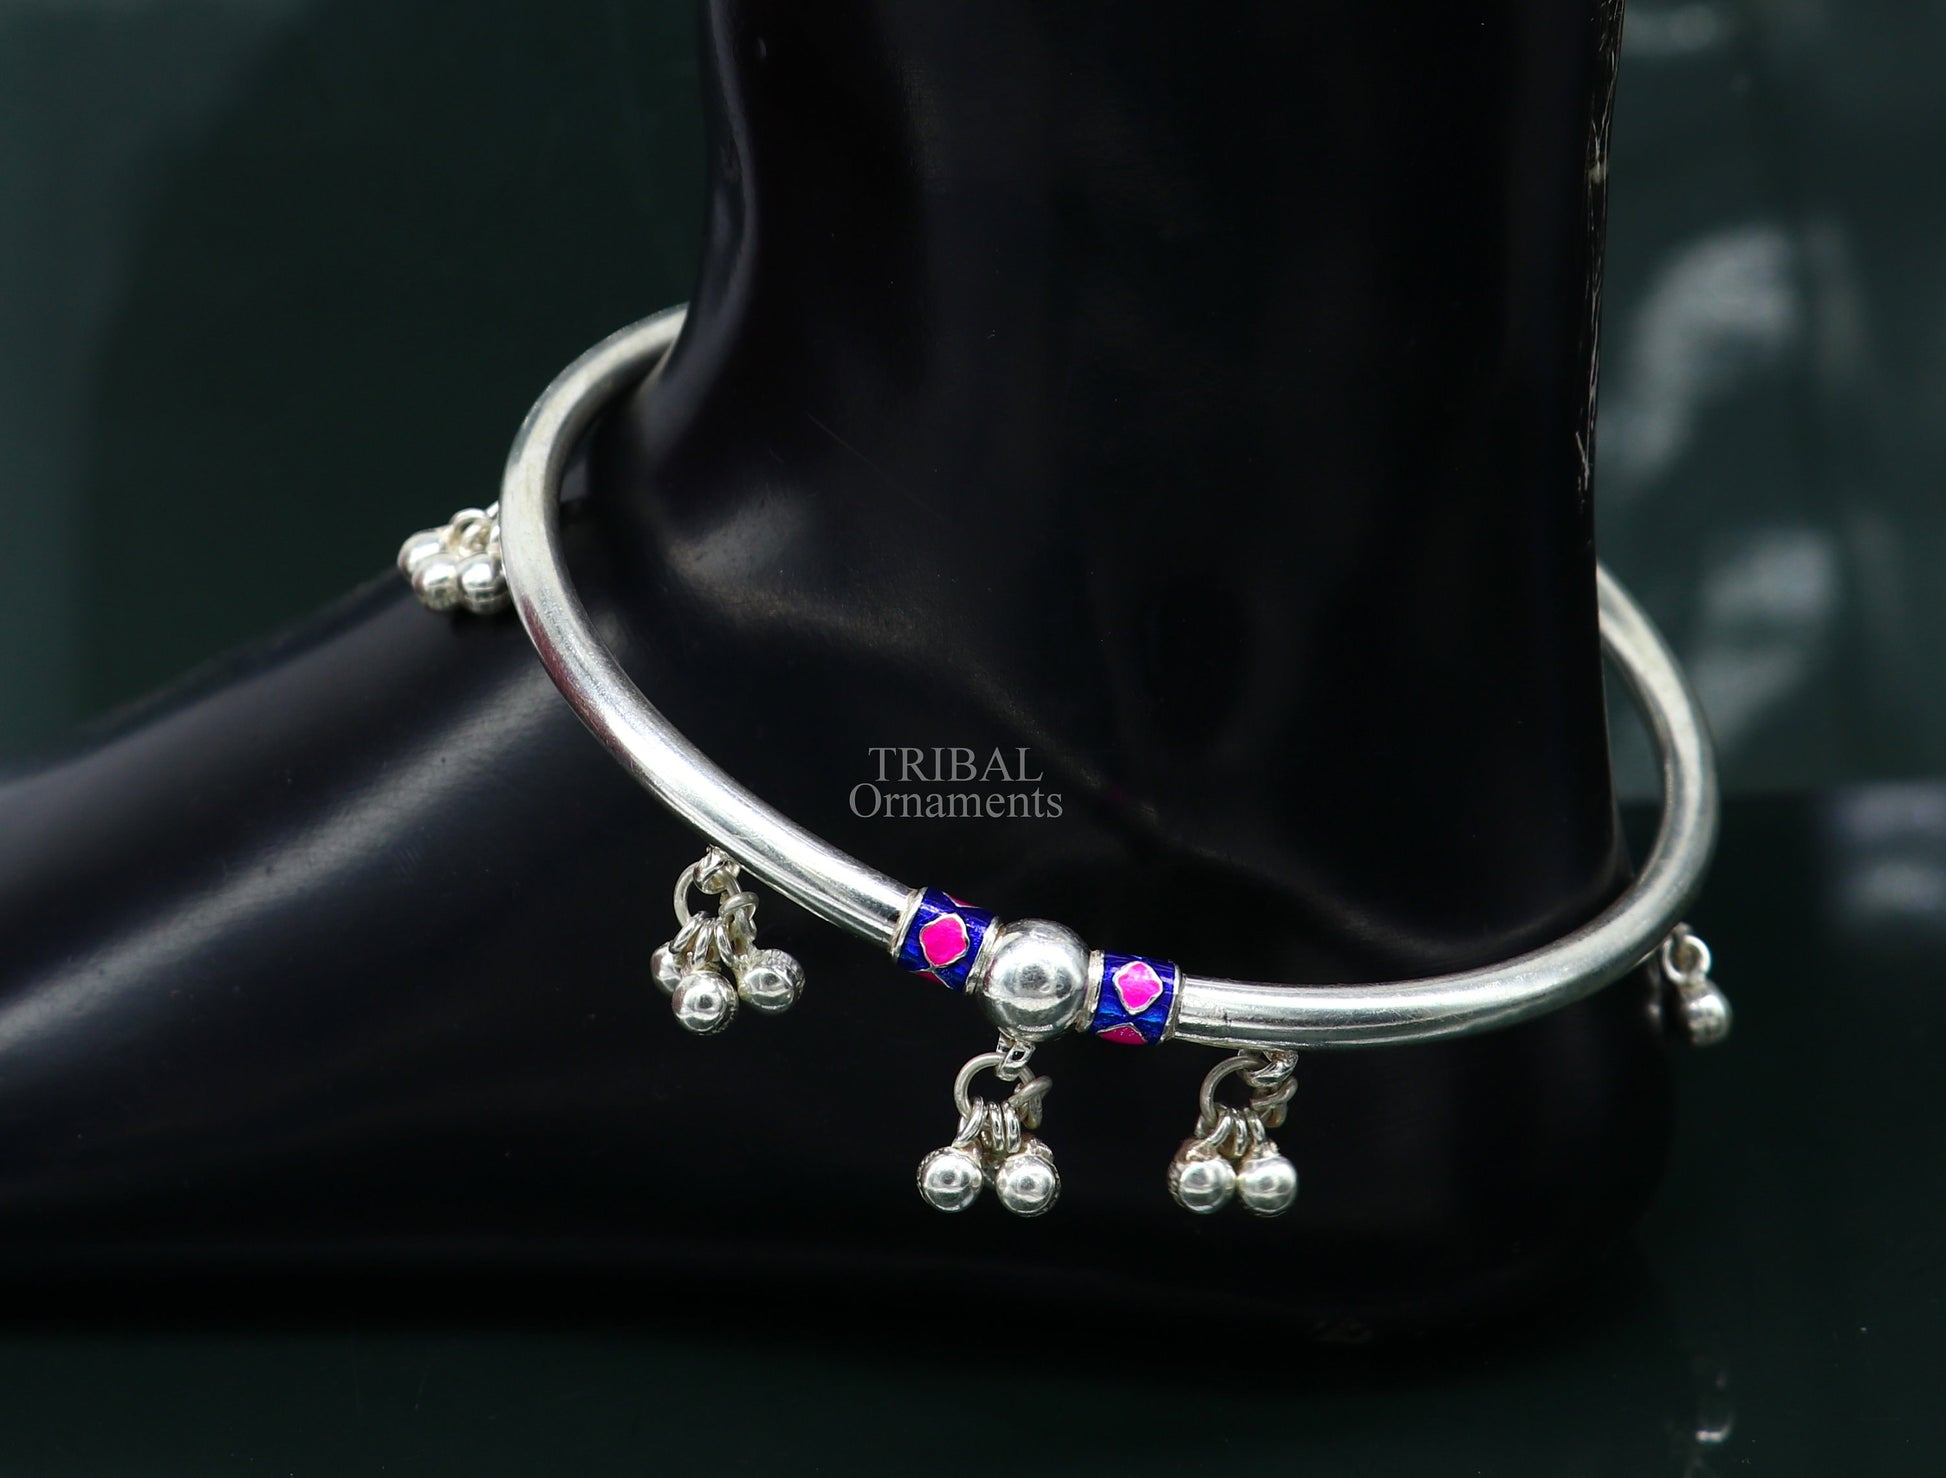 Indian tribal ethnic sterling silver ankle jewelry, best ankle  bangle bracelet, ankle kada with bells, amazing belly dance jewelry nsfk54 - TRIBAL ORNAMENTS